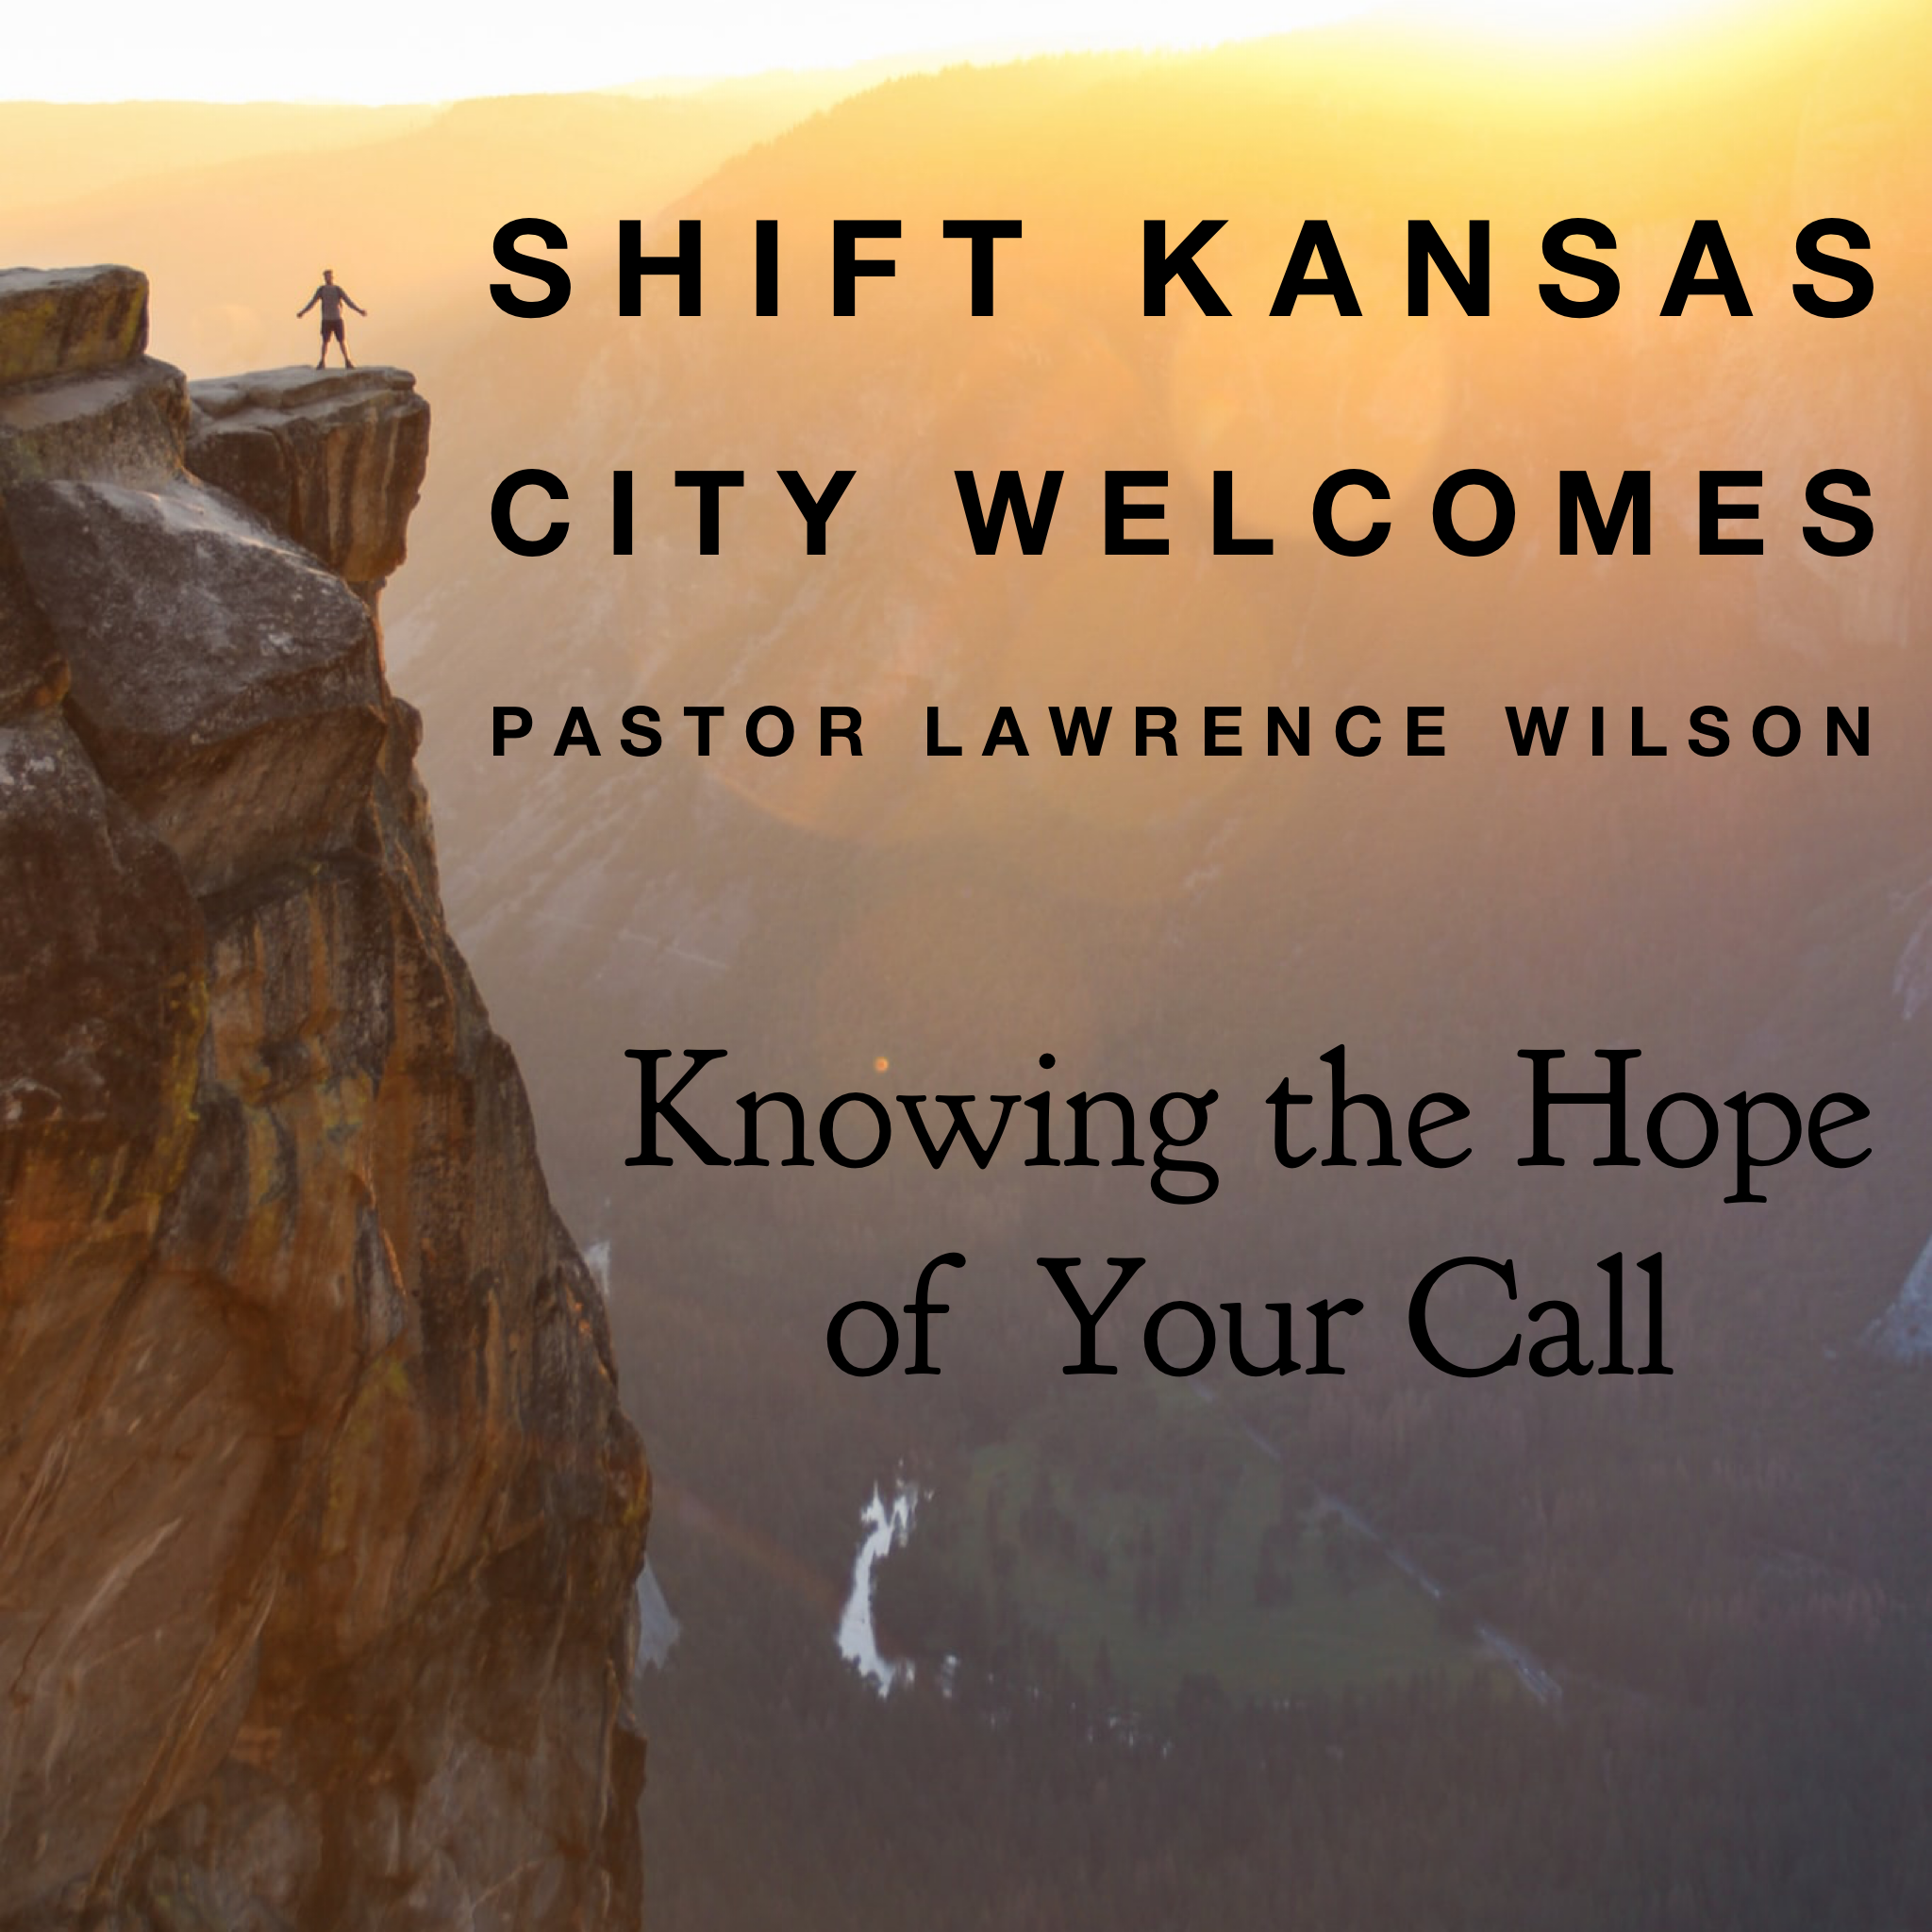 Shift Kansas City Welcomes Pastor Lawrence Wilson- Knowing the Hope of Your Call - 7/12/19